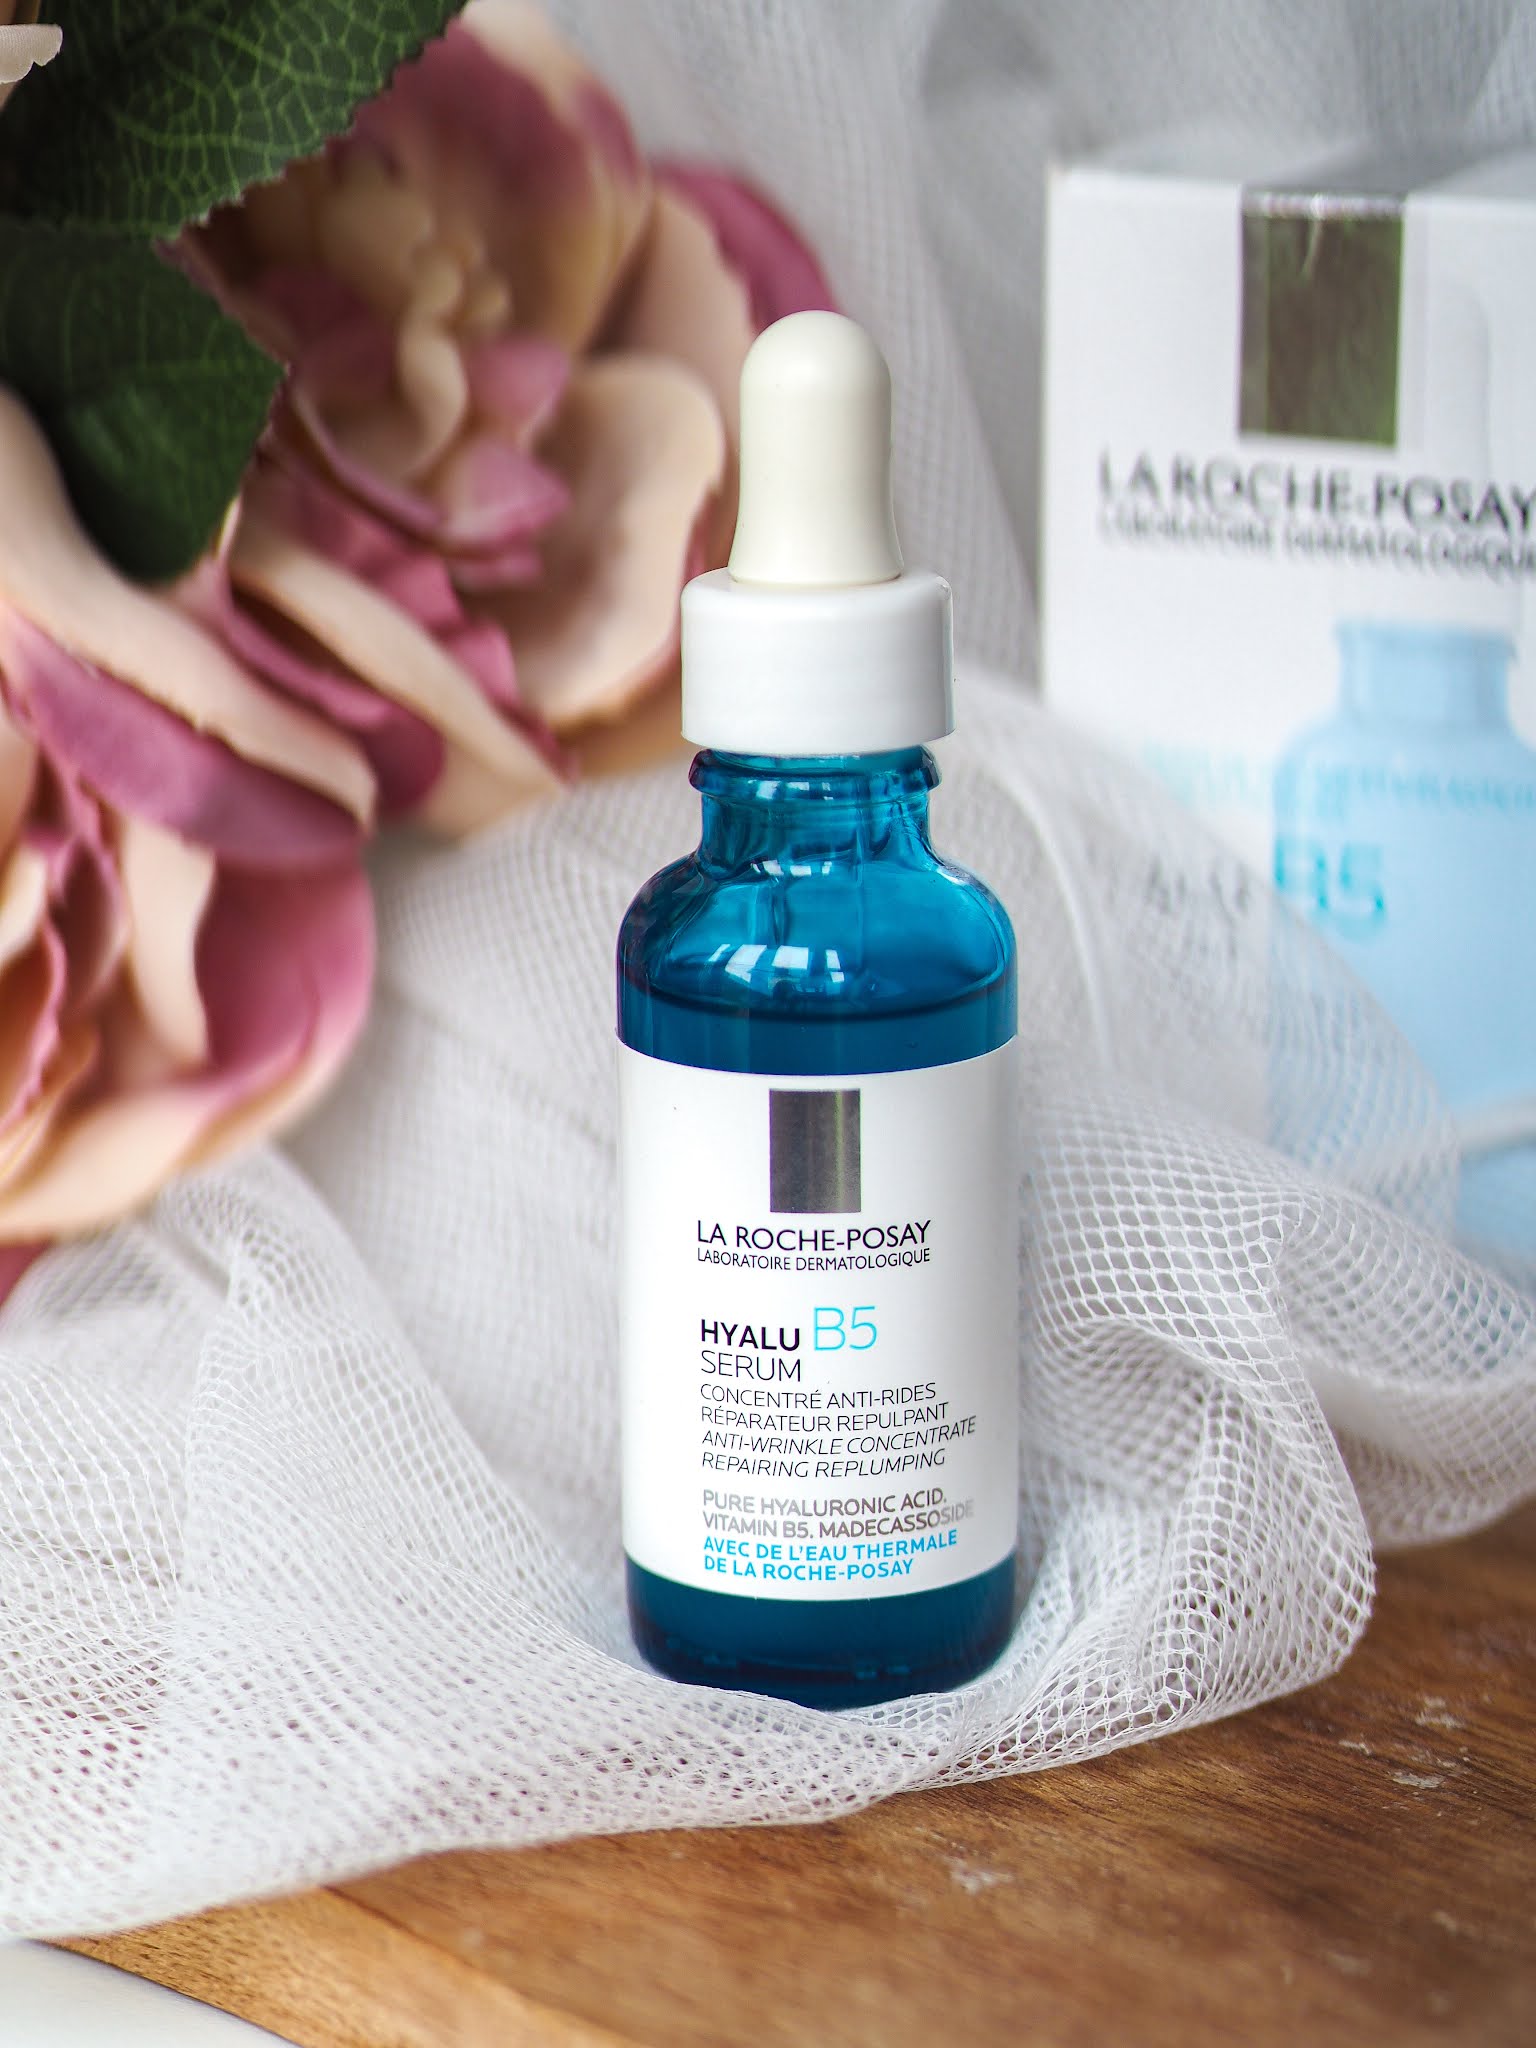 Honest Review] 14 days WITH LA ROCHE-POSAY Hyalu B5 Hyaluronic Acid Serum 